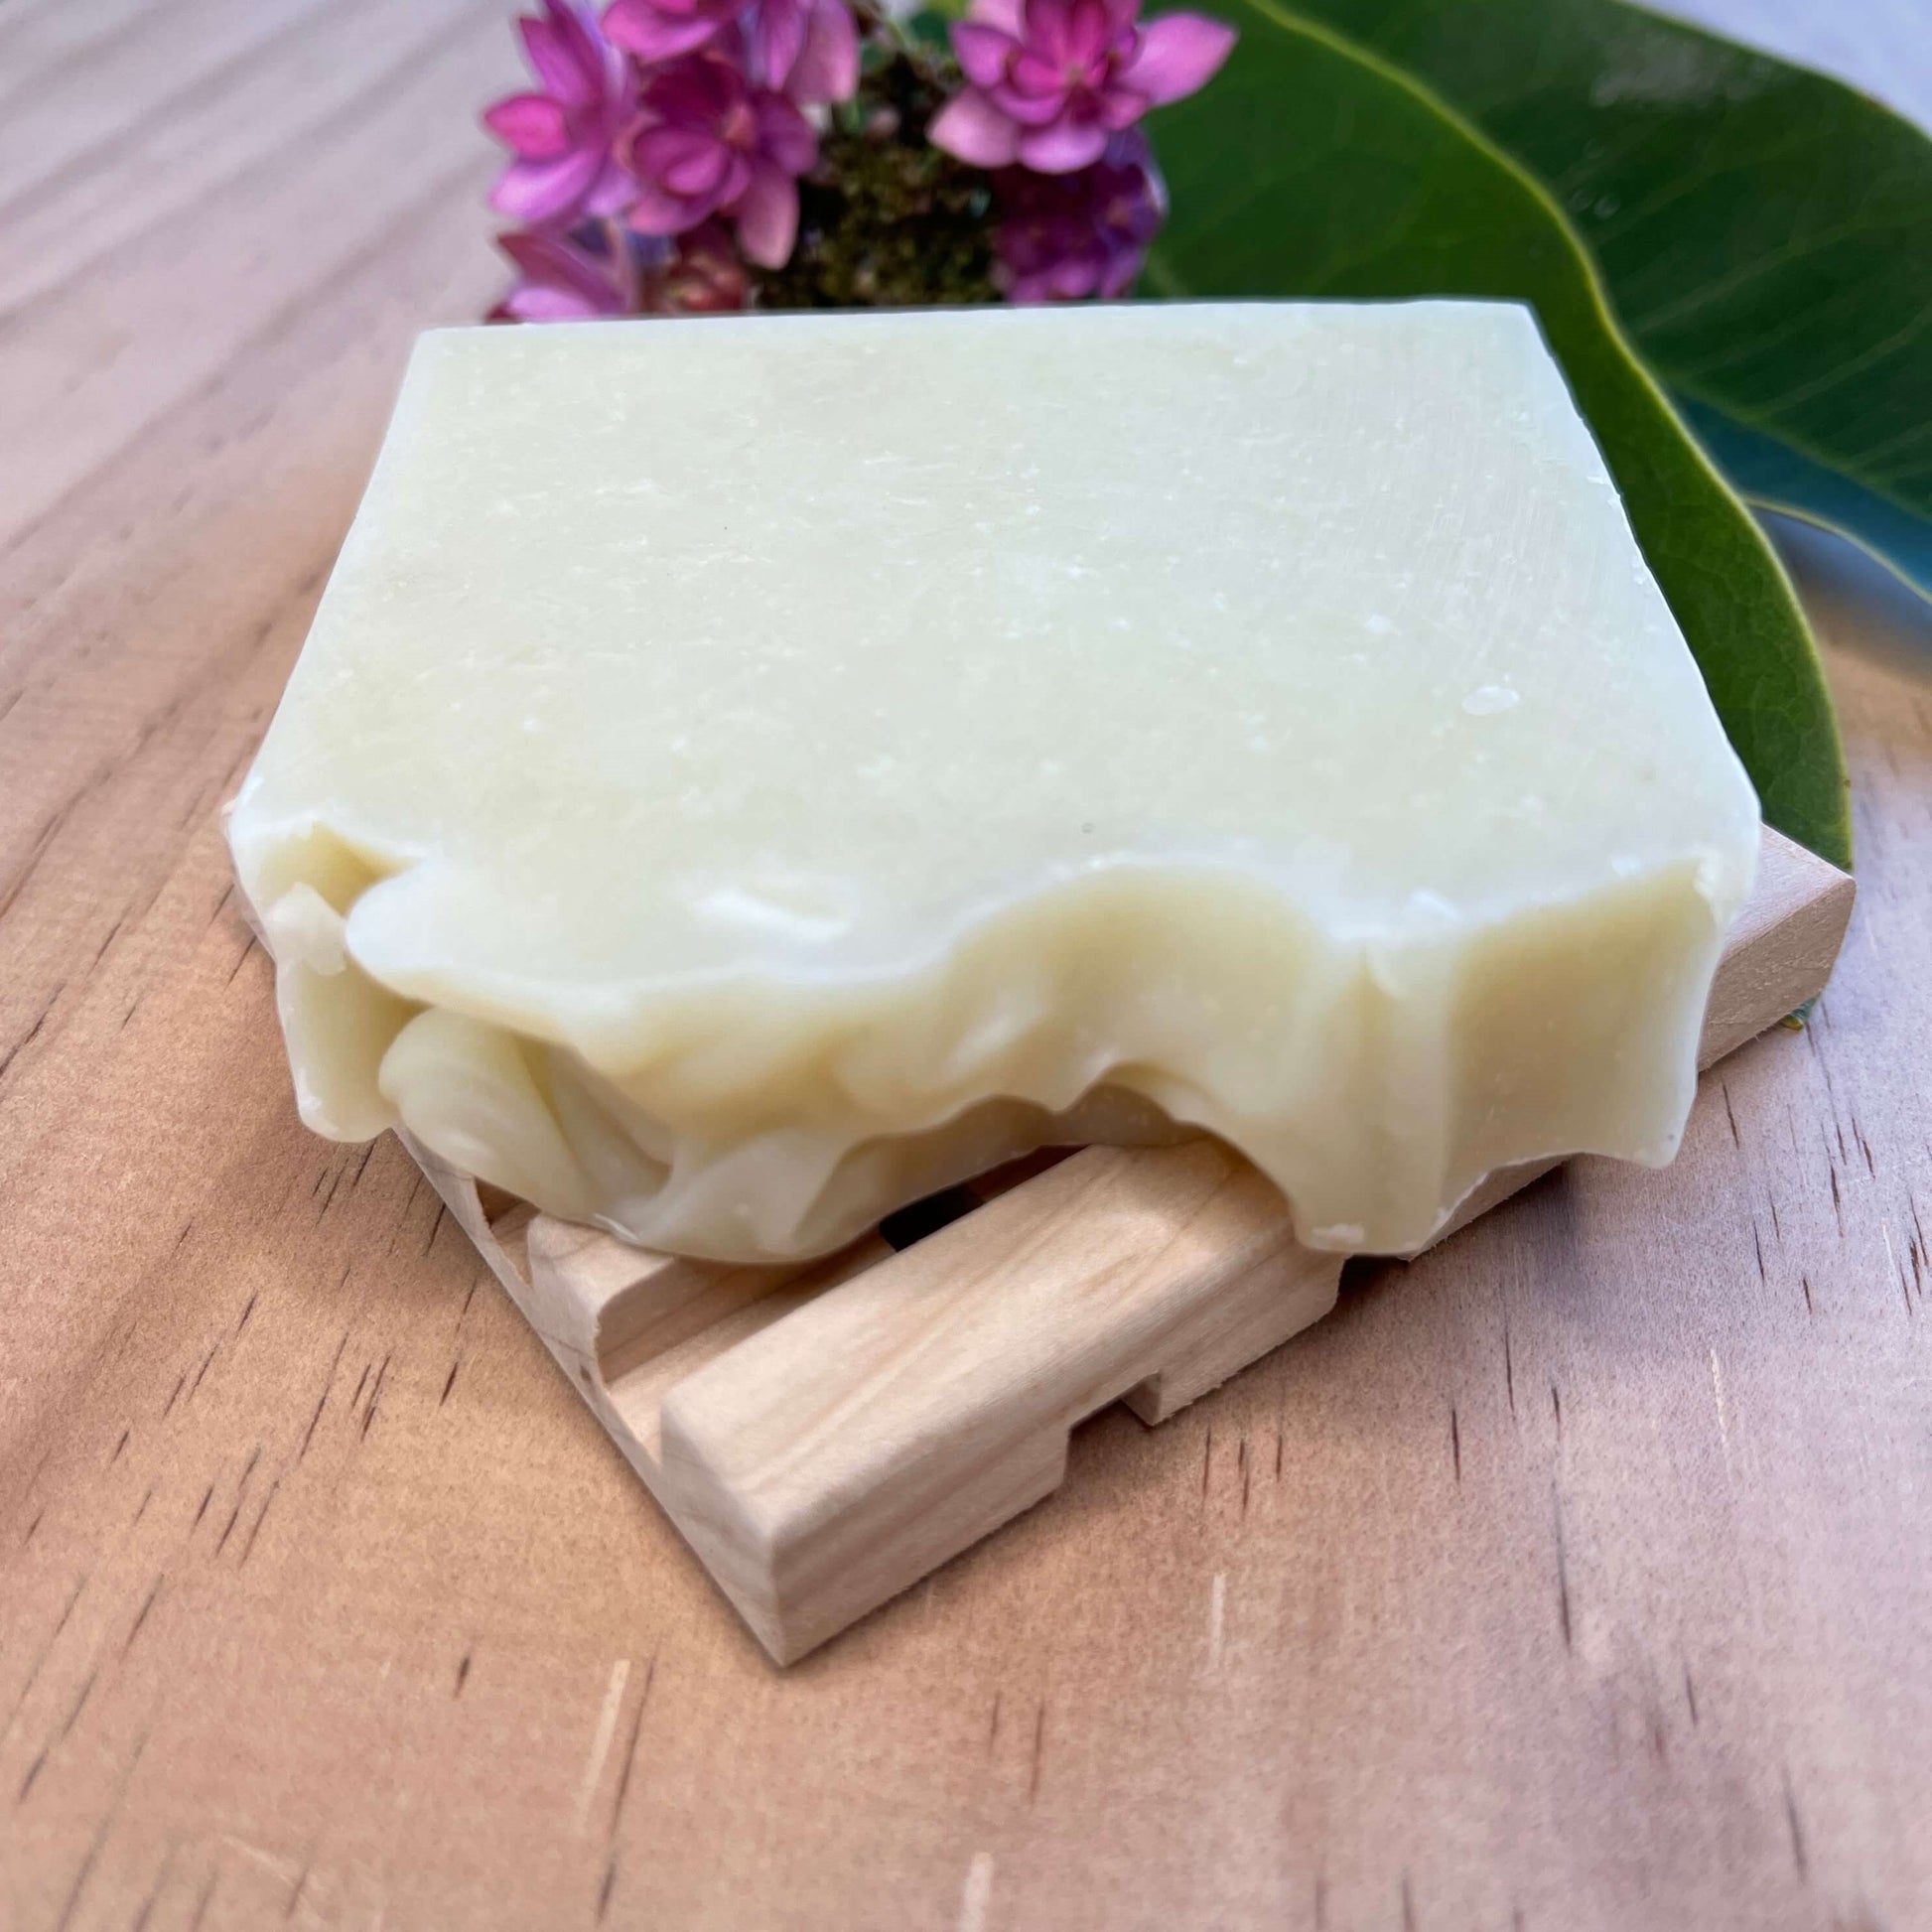 Lavender body soap on a wooden soap dish.